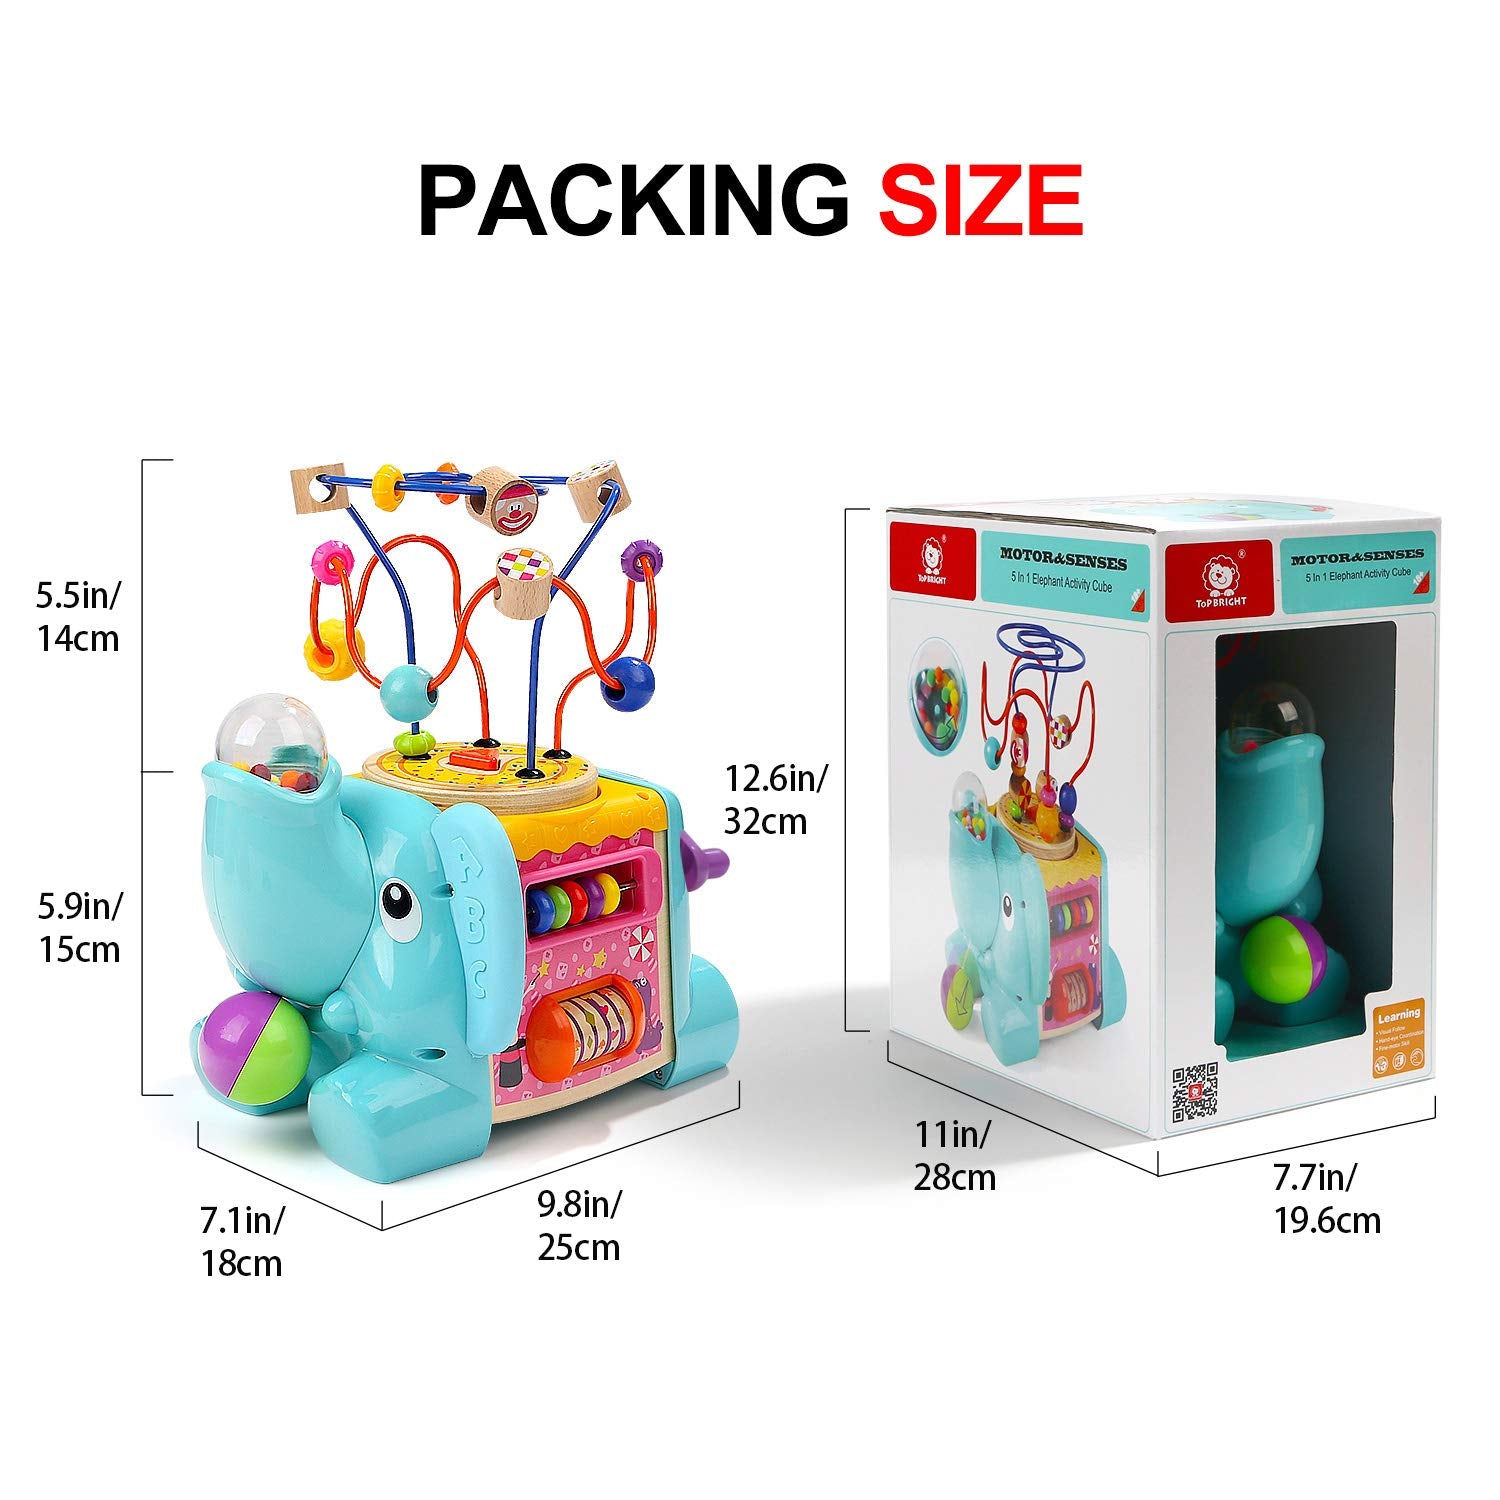 TOP BRIGHT Activity Cube Toys - Baby Toys with Bead Maze for Toddlers 1 2 Year Old Boy and Girl Gifts